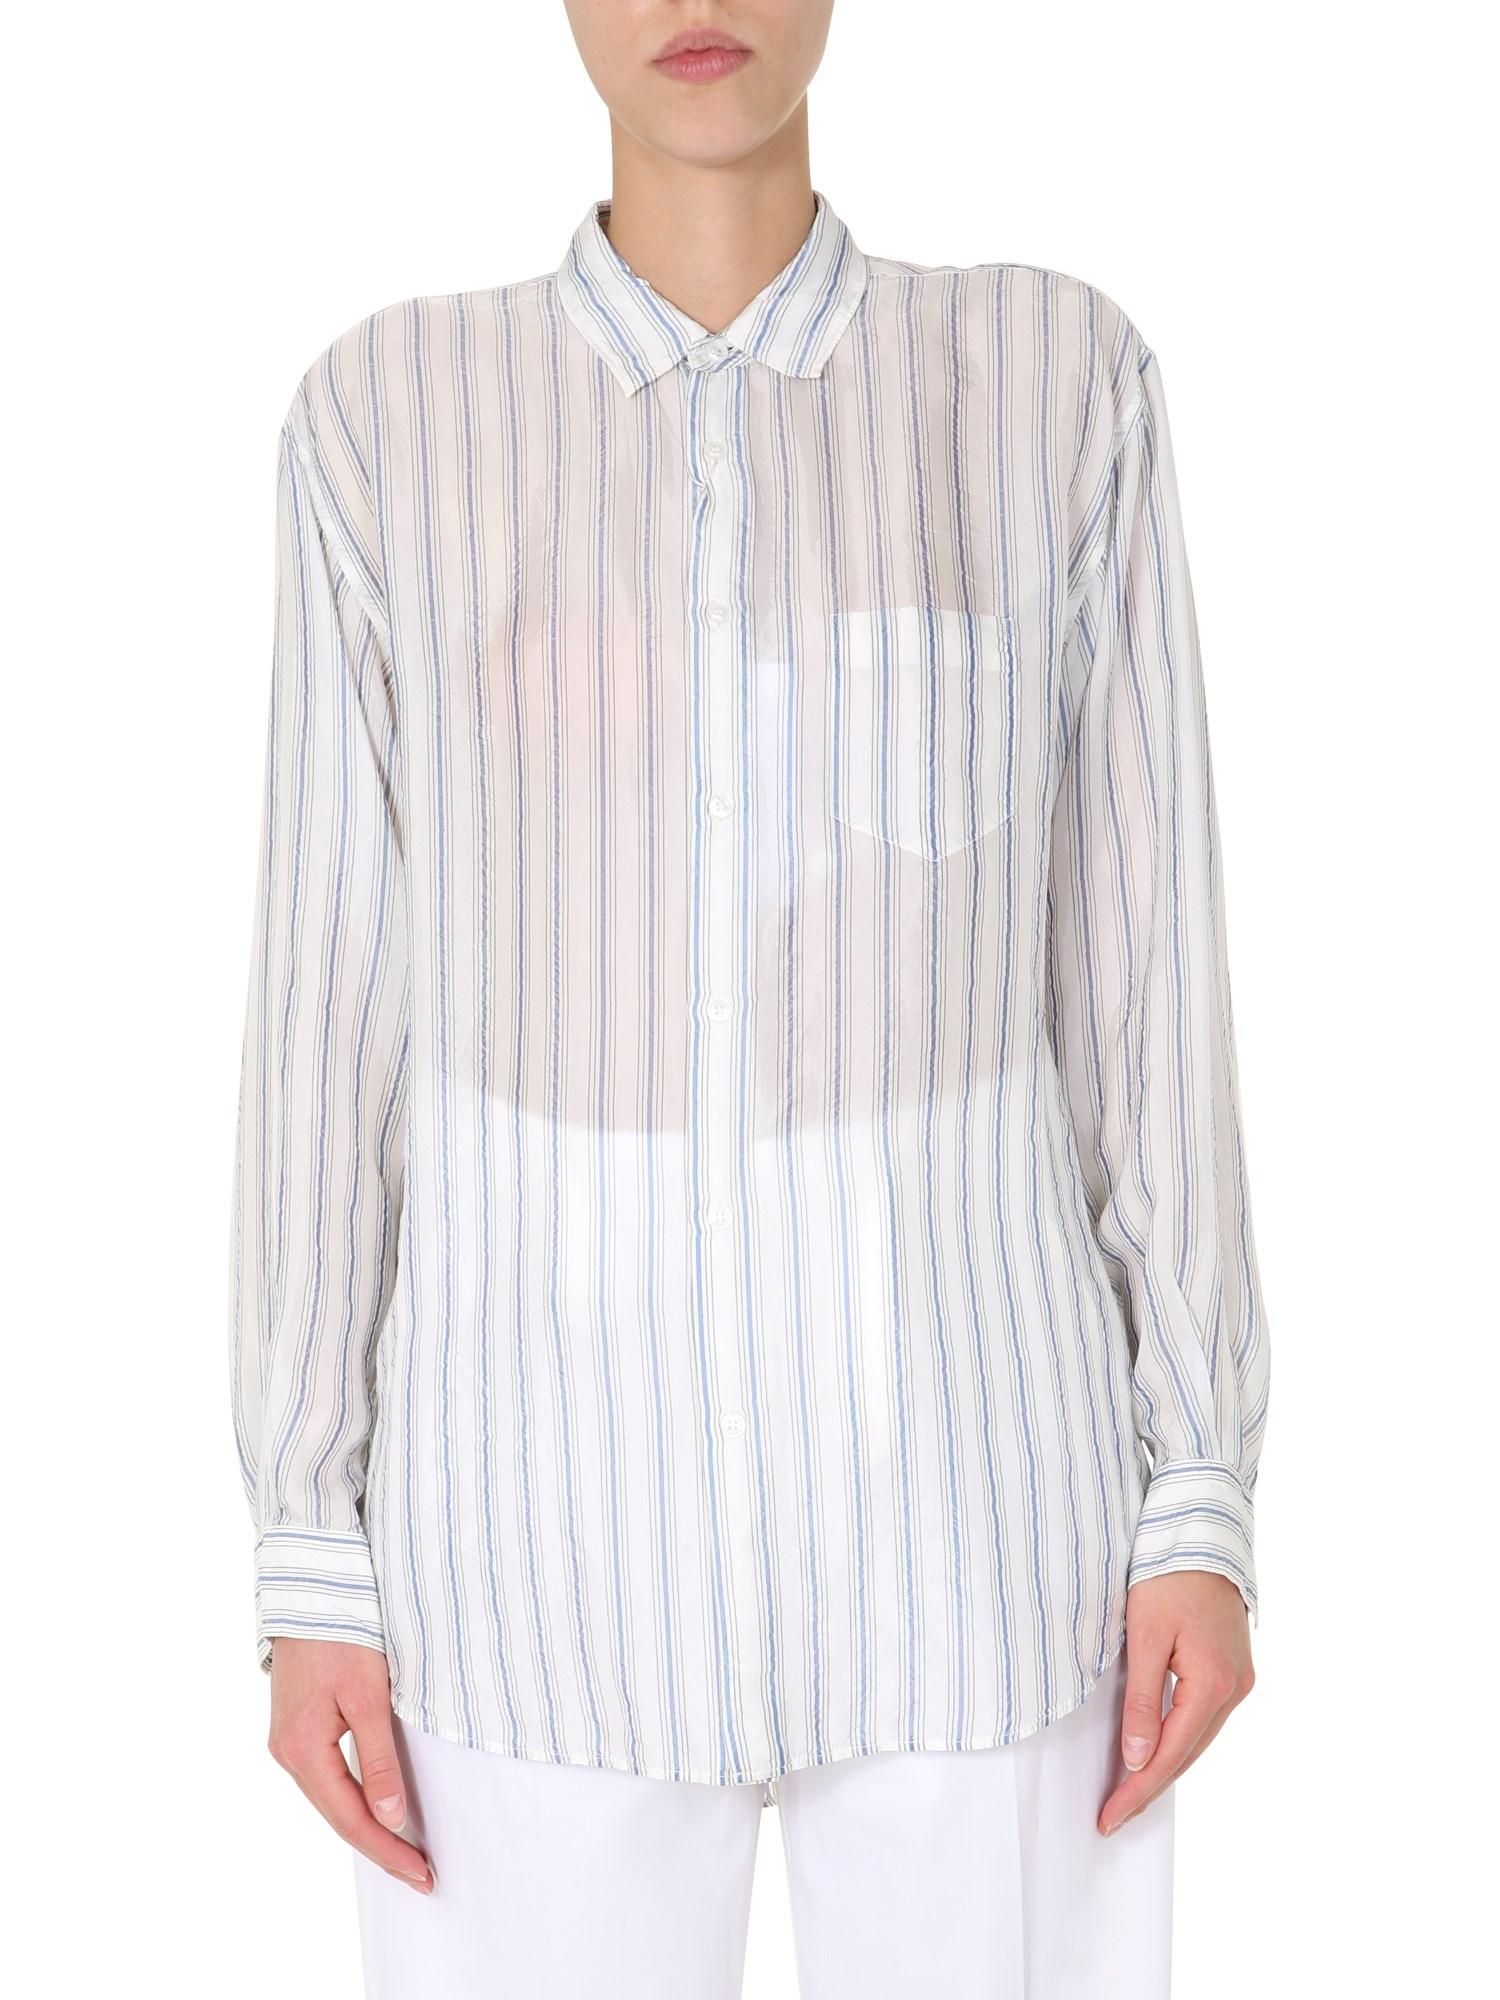 Maison Margiela Cupro Shirt With Striped Pattern in Blue - Lyst